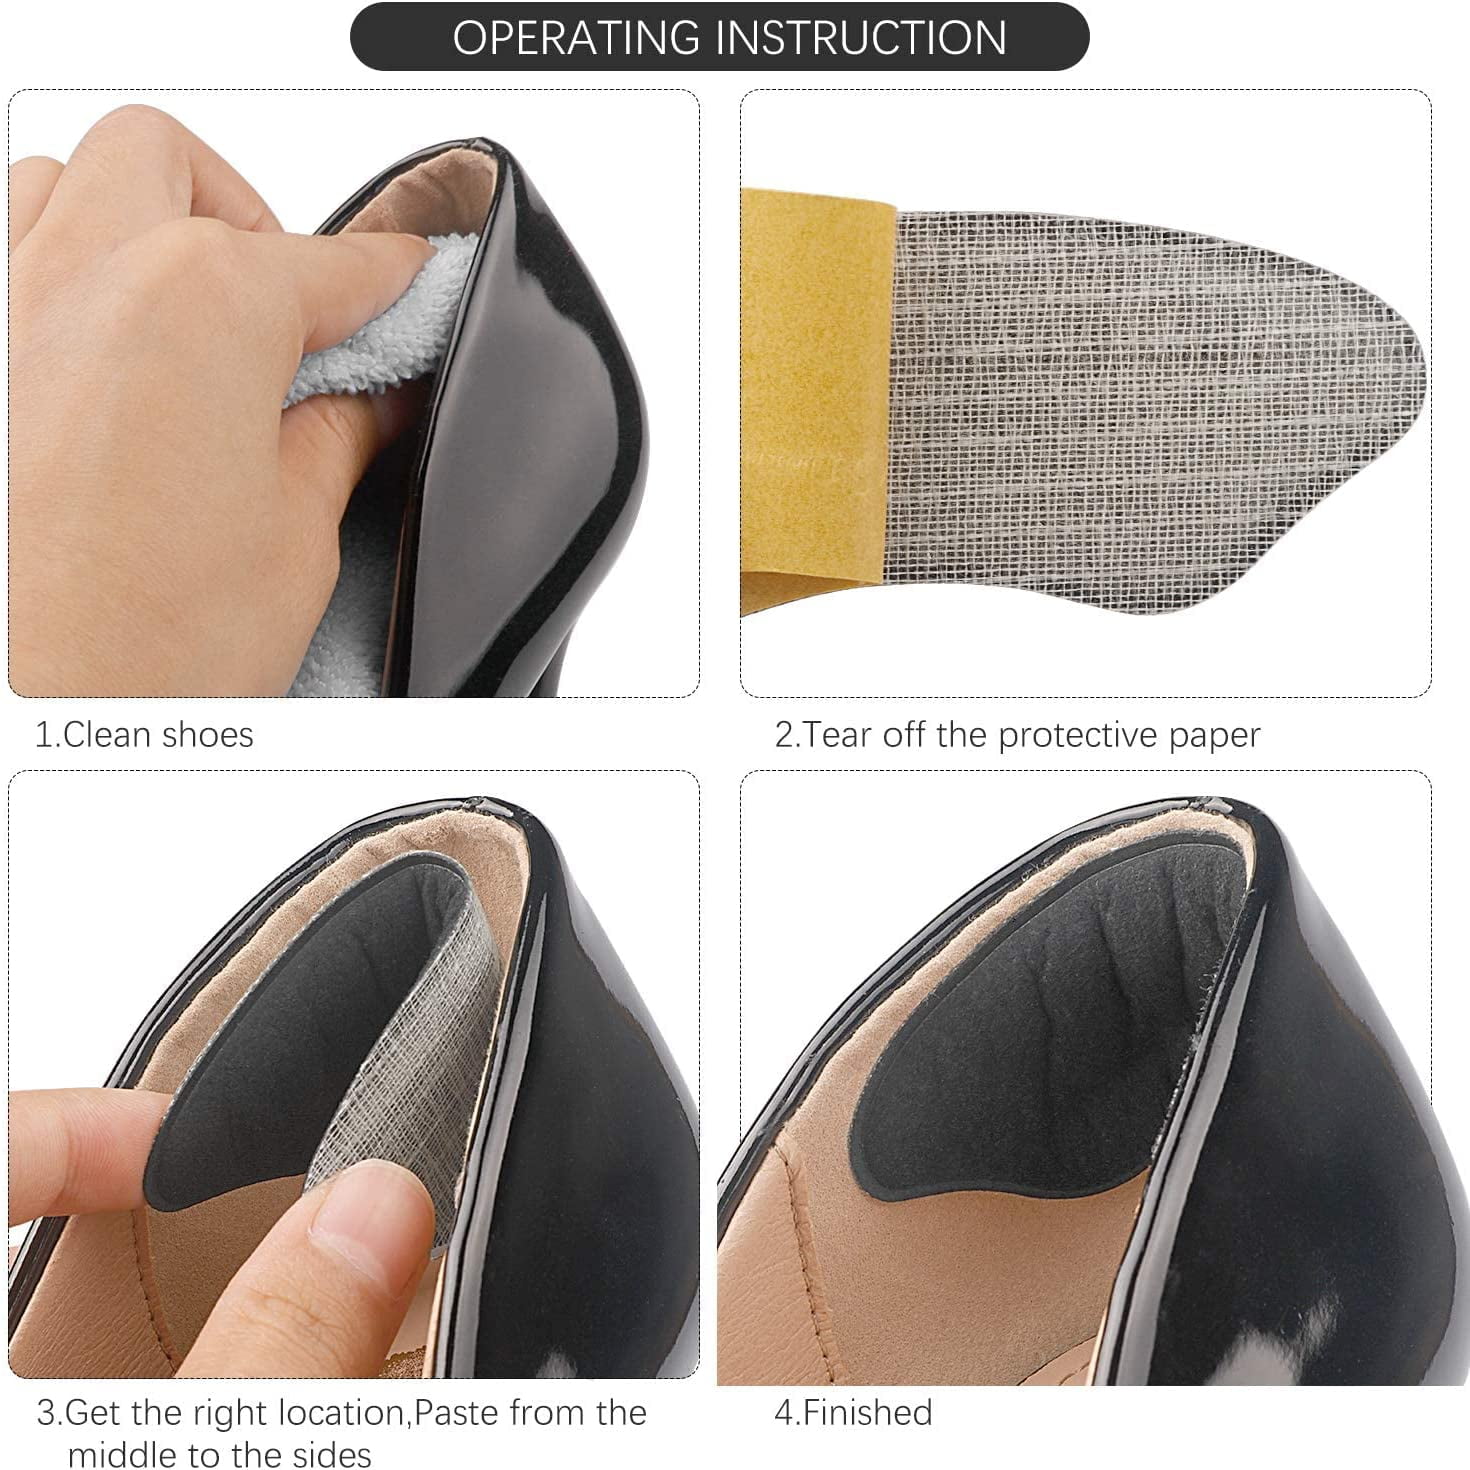 Heel Grips Shoe Pads For Women's High Heel, Anti-slip Heel Cushion Inserts  For Shoes Too Big, Leather Shoes, Loafers, Half Size Heel Insoles | SHEIN  USA